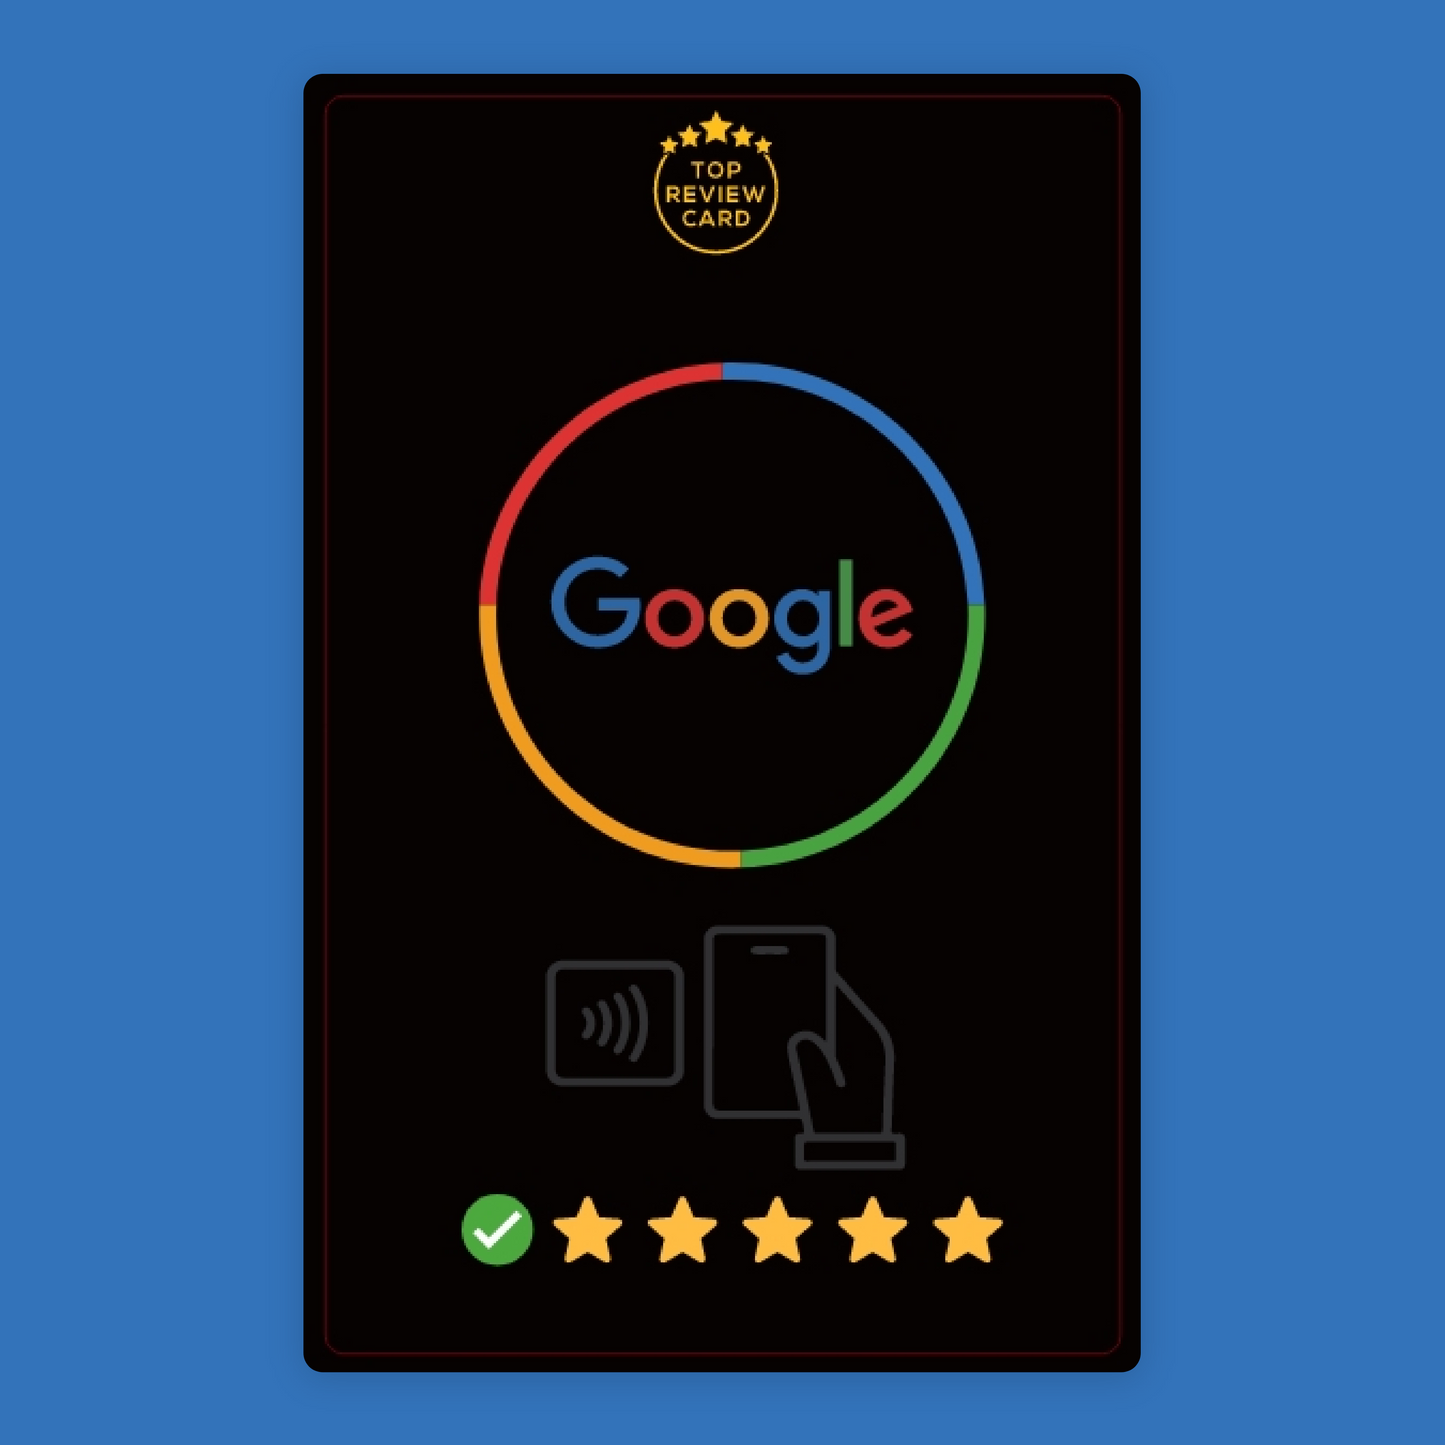 levate your online presence with our sleek Google Review Cards, designed to enhance your business's credibility and reputation.